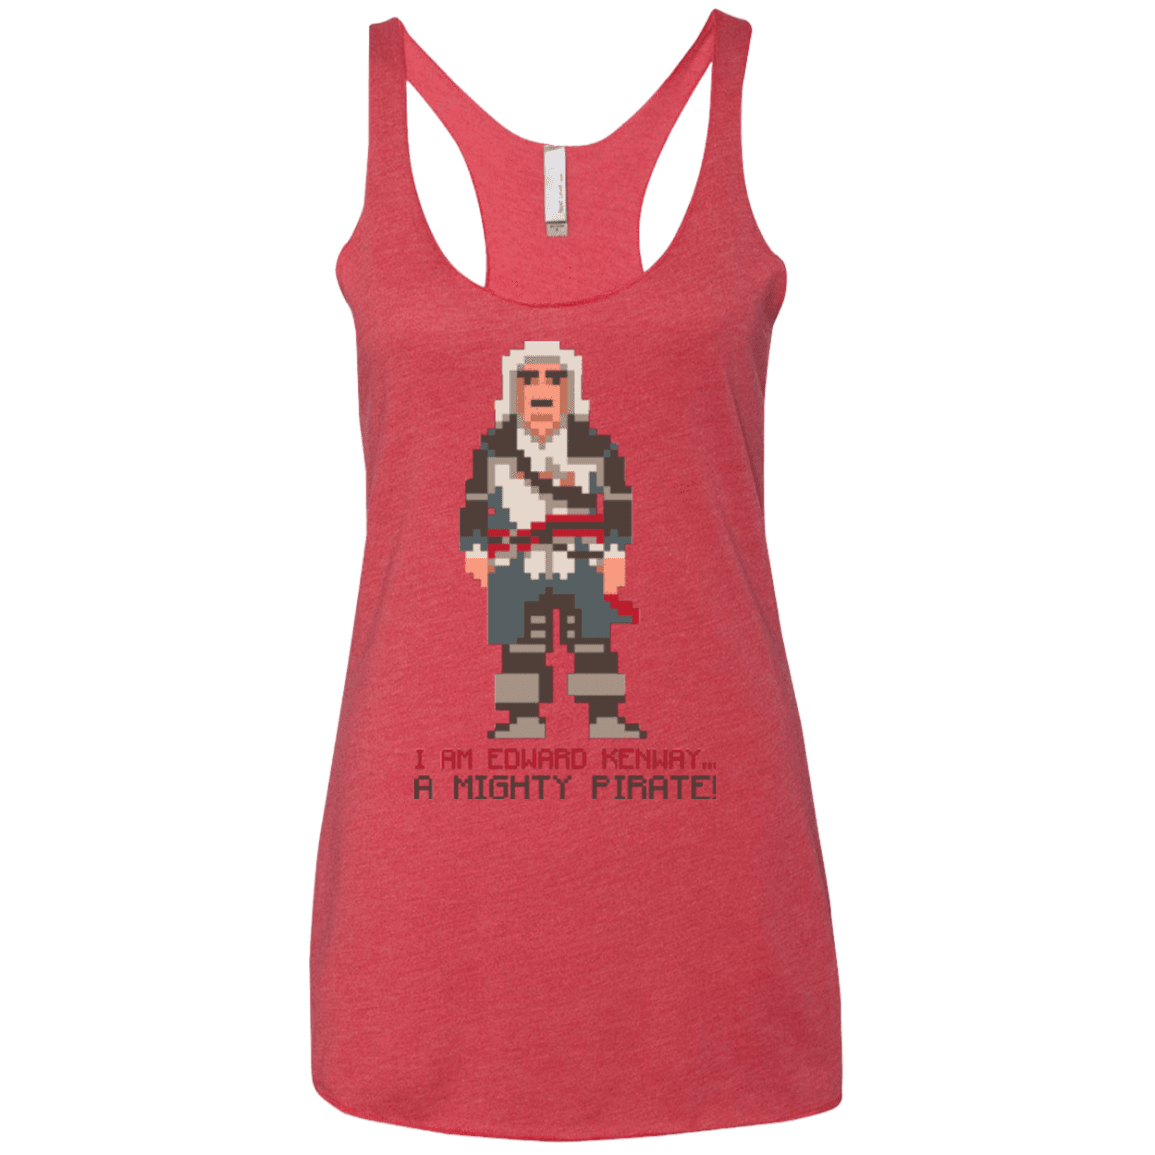 T-Shirts Vintage Red / X-Small A Mighty Pirate Women's Triblend Racerback Tank